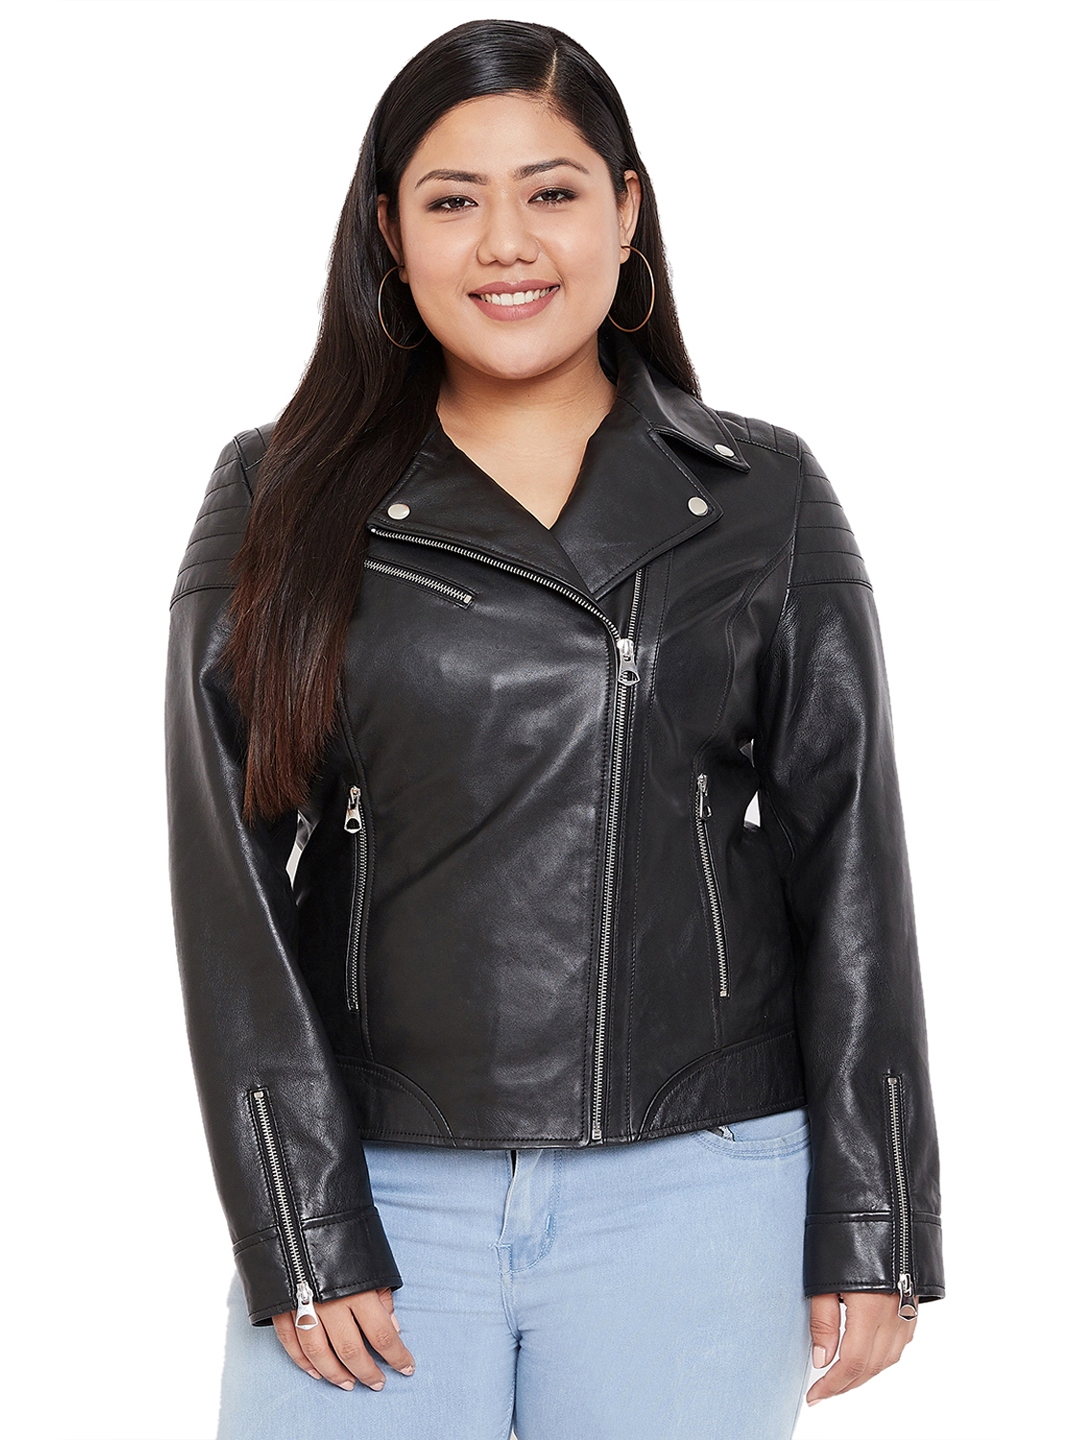 Justanned | Justanned Women Black Genuine Real Leather Jacket